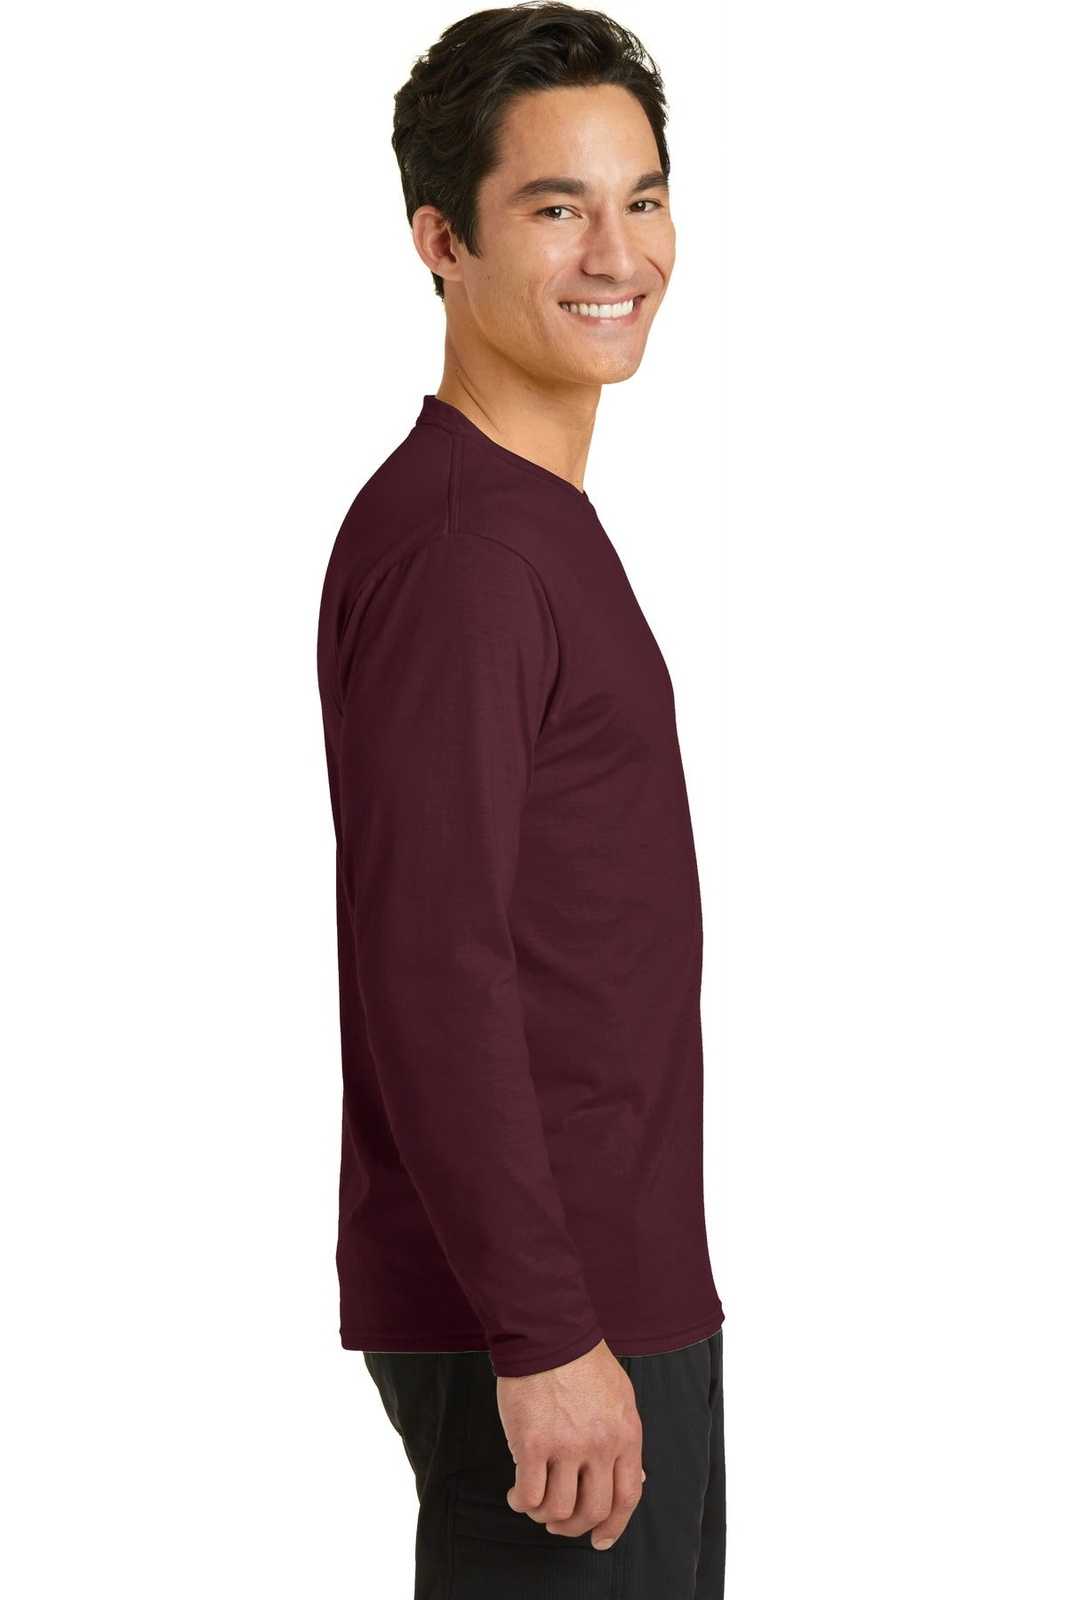 Port &amp; Company PC381LS Long Sleeve Performance Blend Tee - Athletic Maroon - HIT a Double - 3